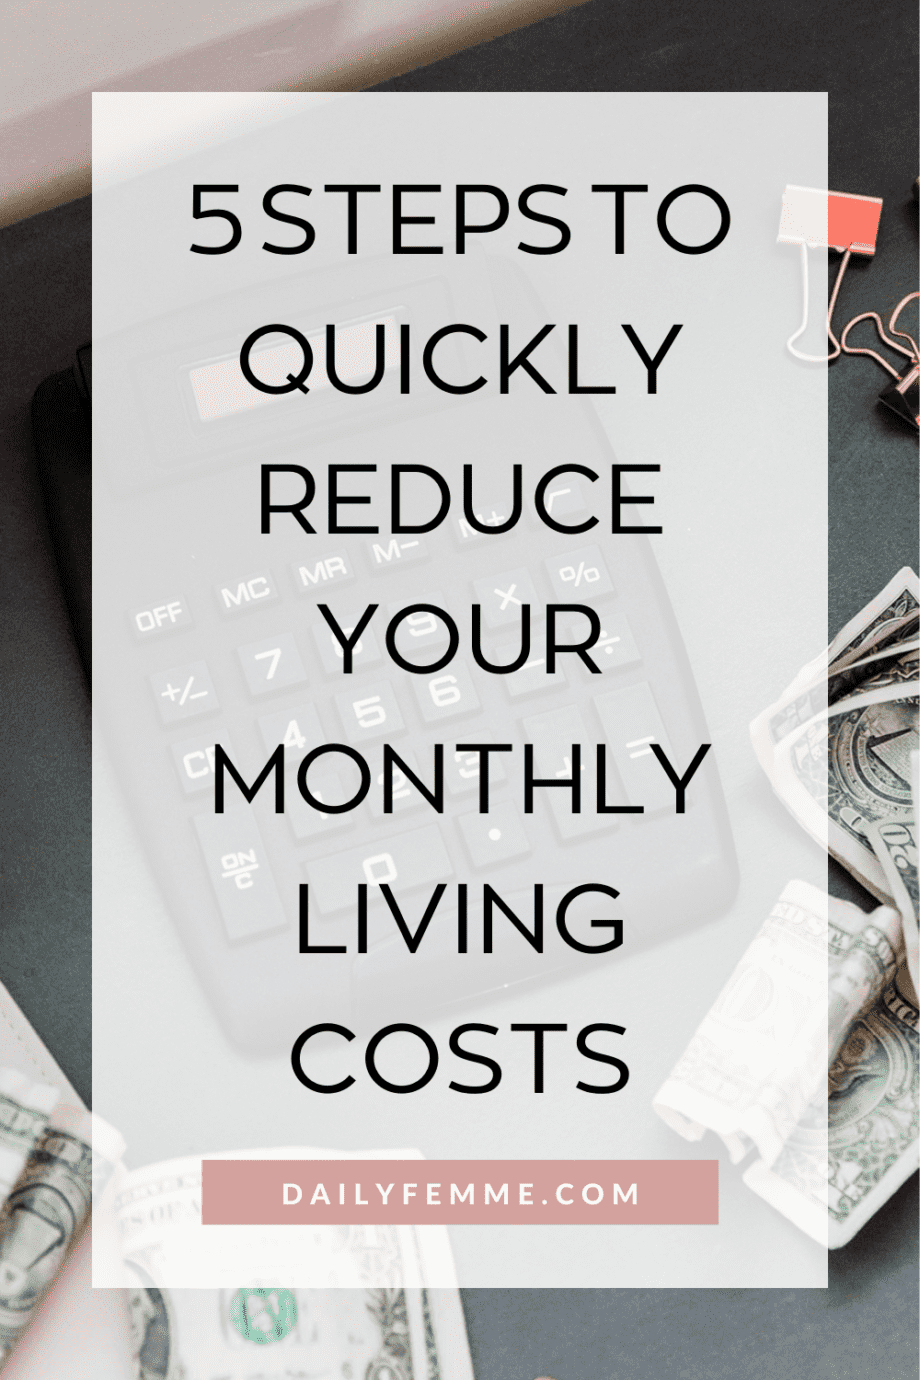 If you're looking to save money here are 5 strategies to reduce your monthly living costs and cut your expenses.